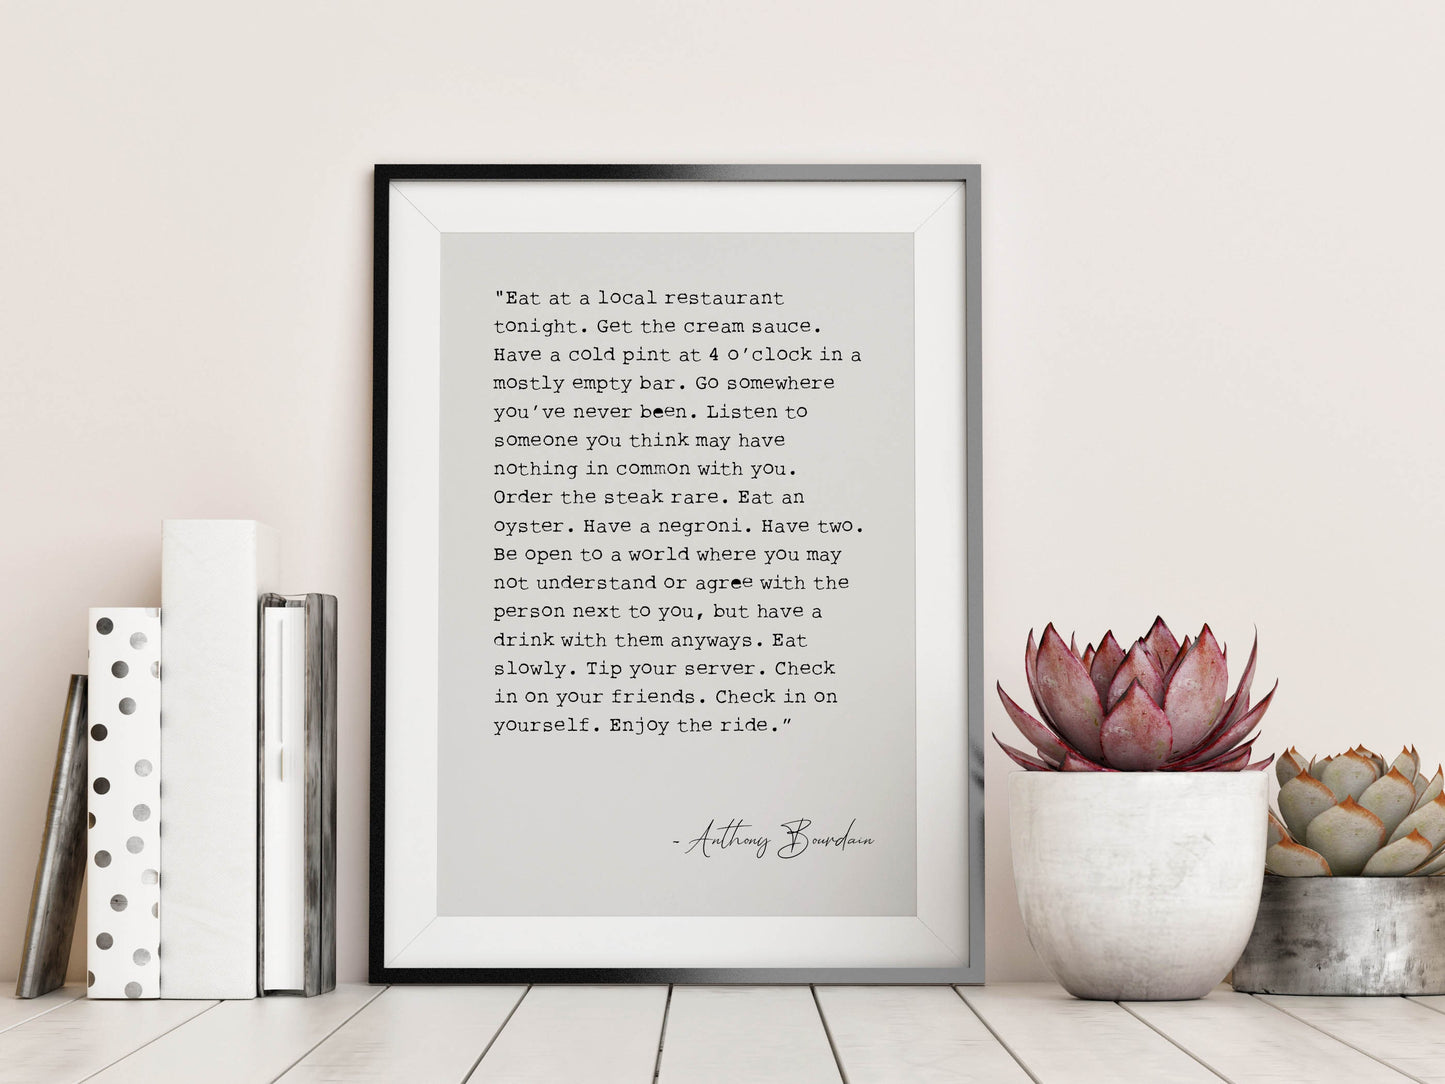 Anthony Bourdain Quote,  Framed Art print, Eat at a local restaurant tonight, inspirational art print poster quote